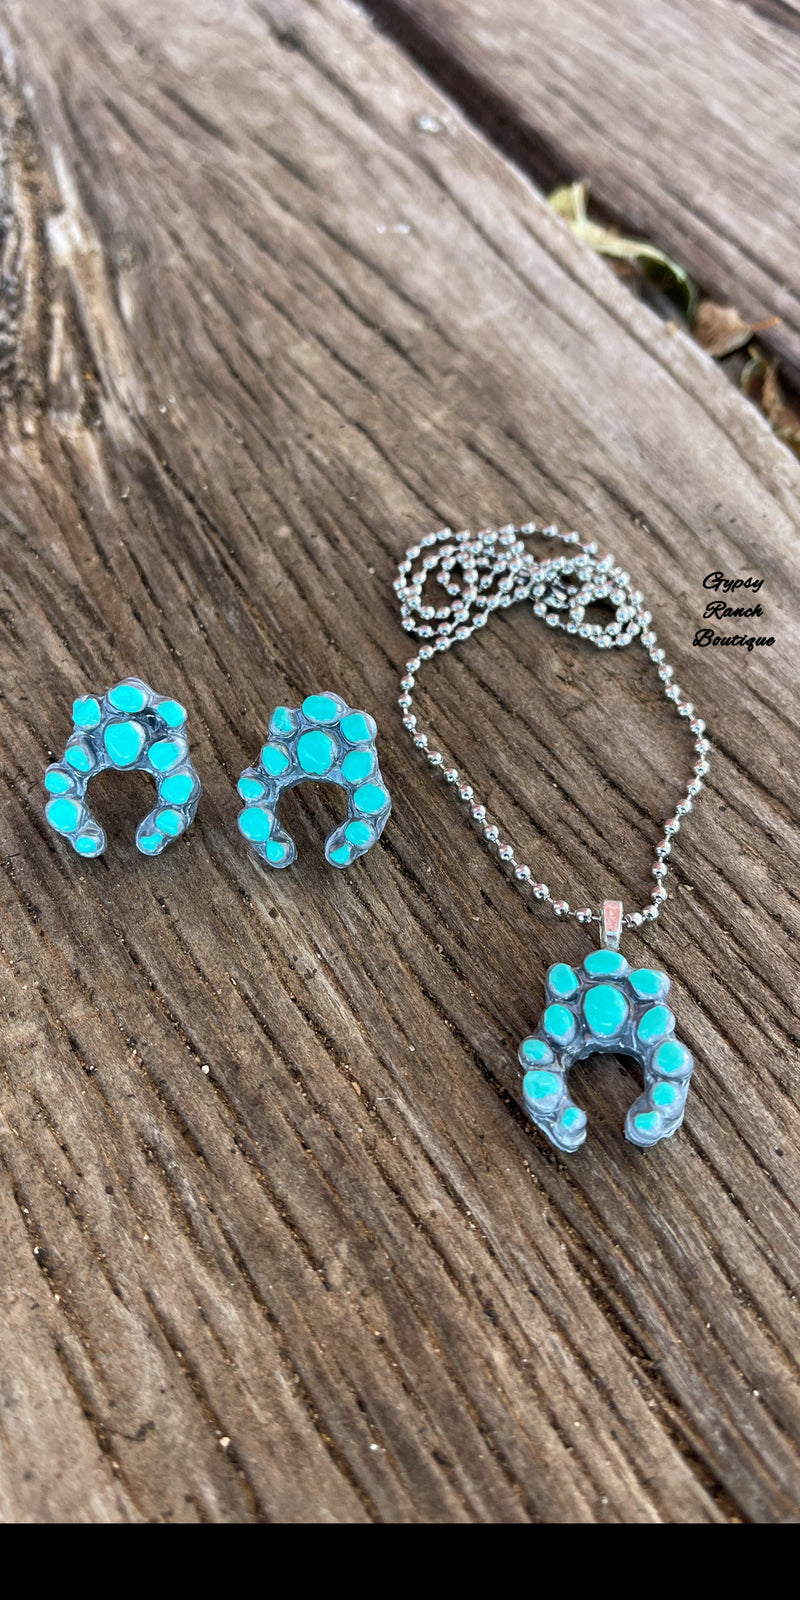 Dainty Turquoise Baby Squash Necklace or Earrings